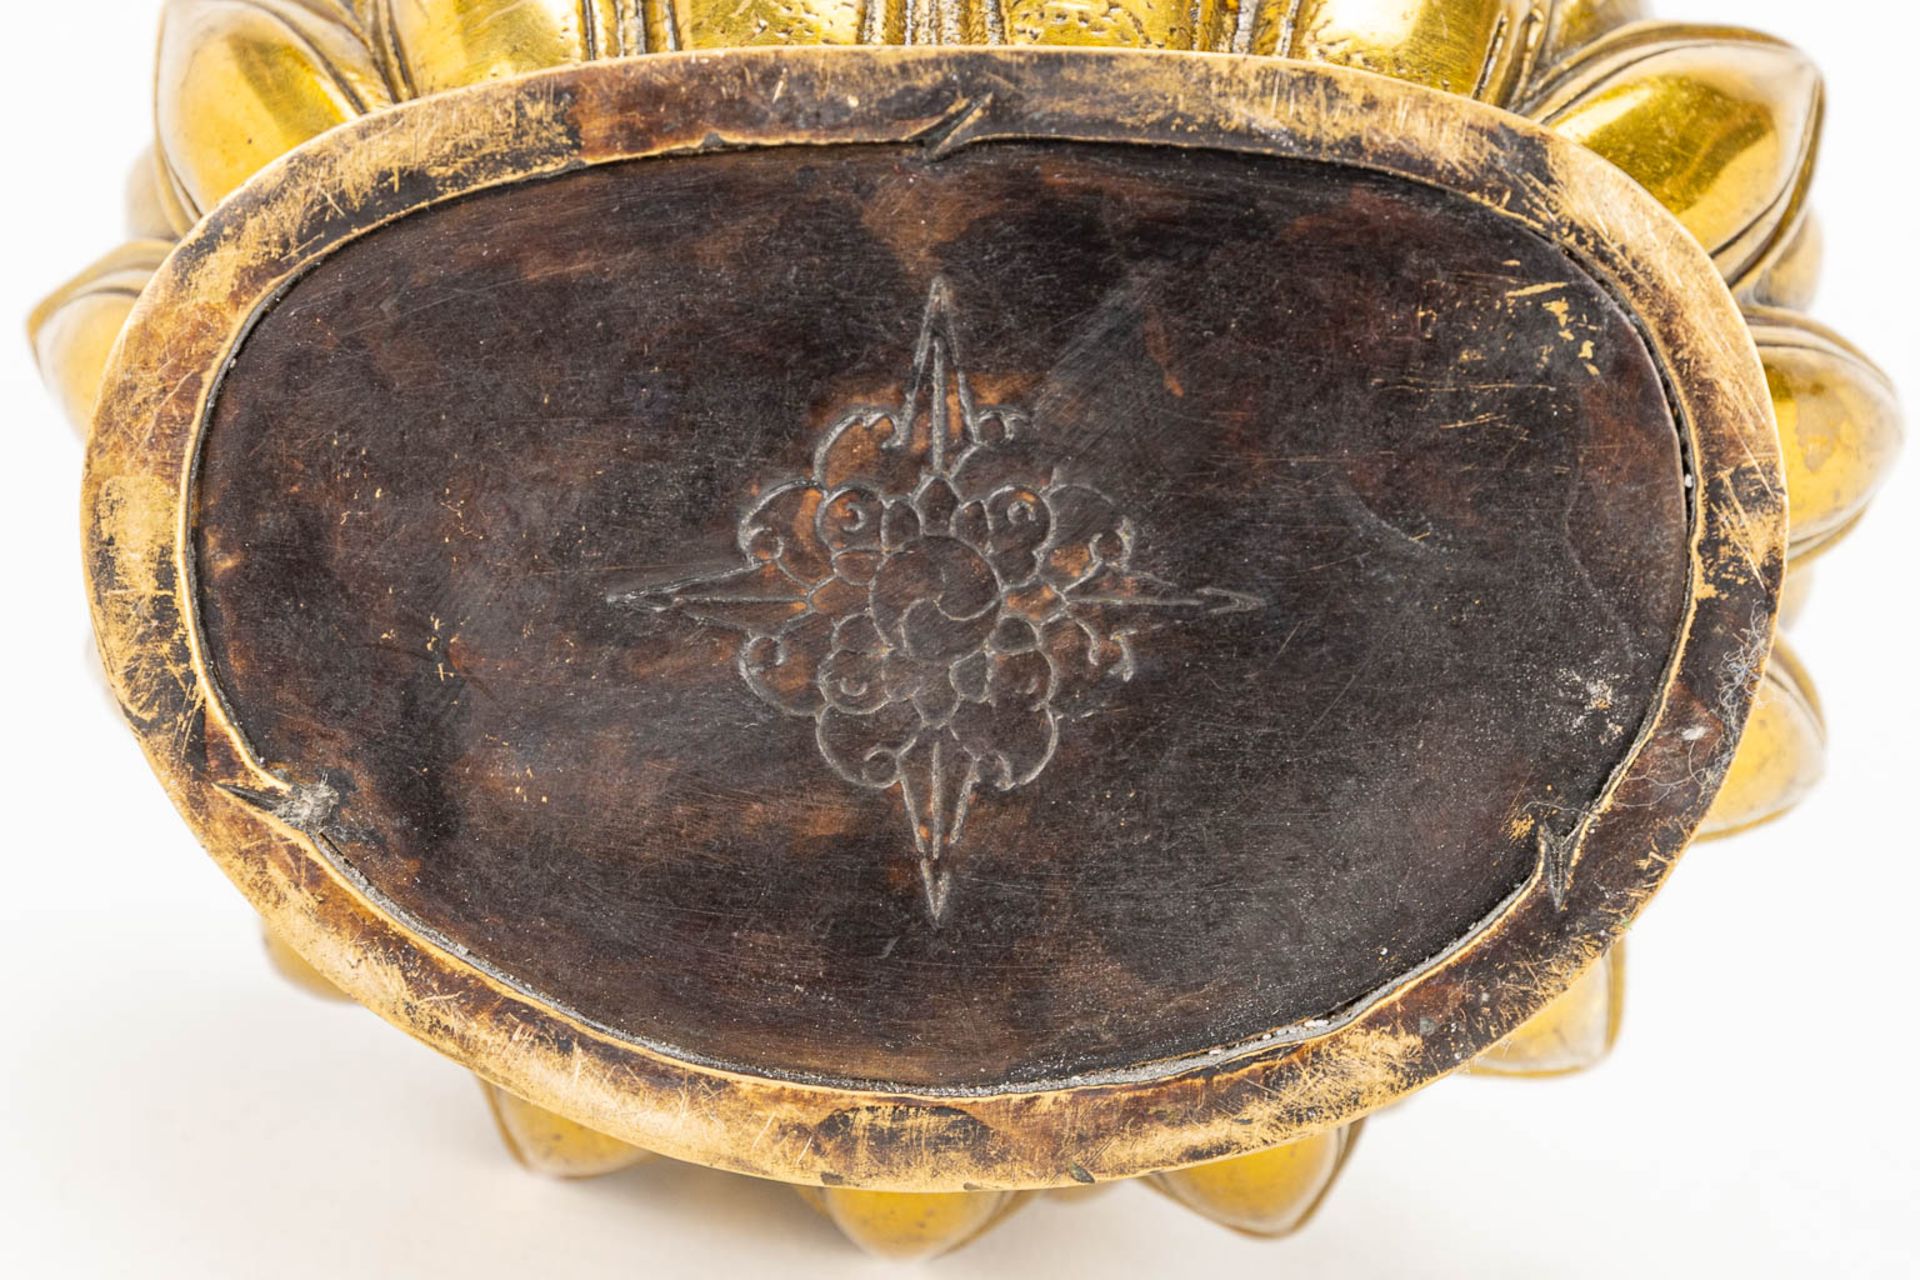 A Buddha on a lotus flower made of bronze. - Image 11 of 11